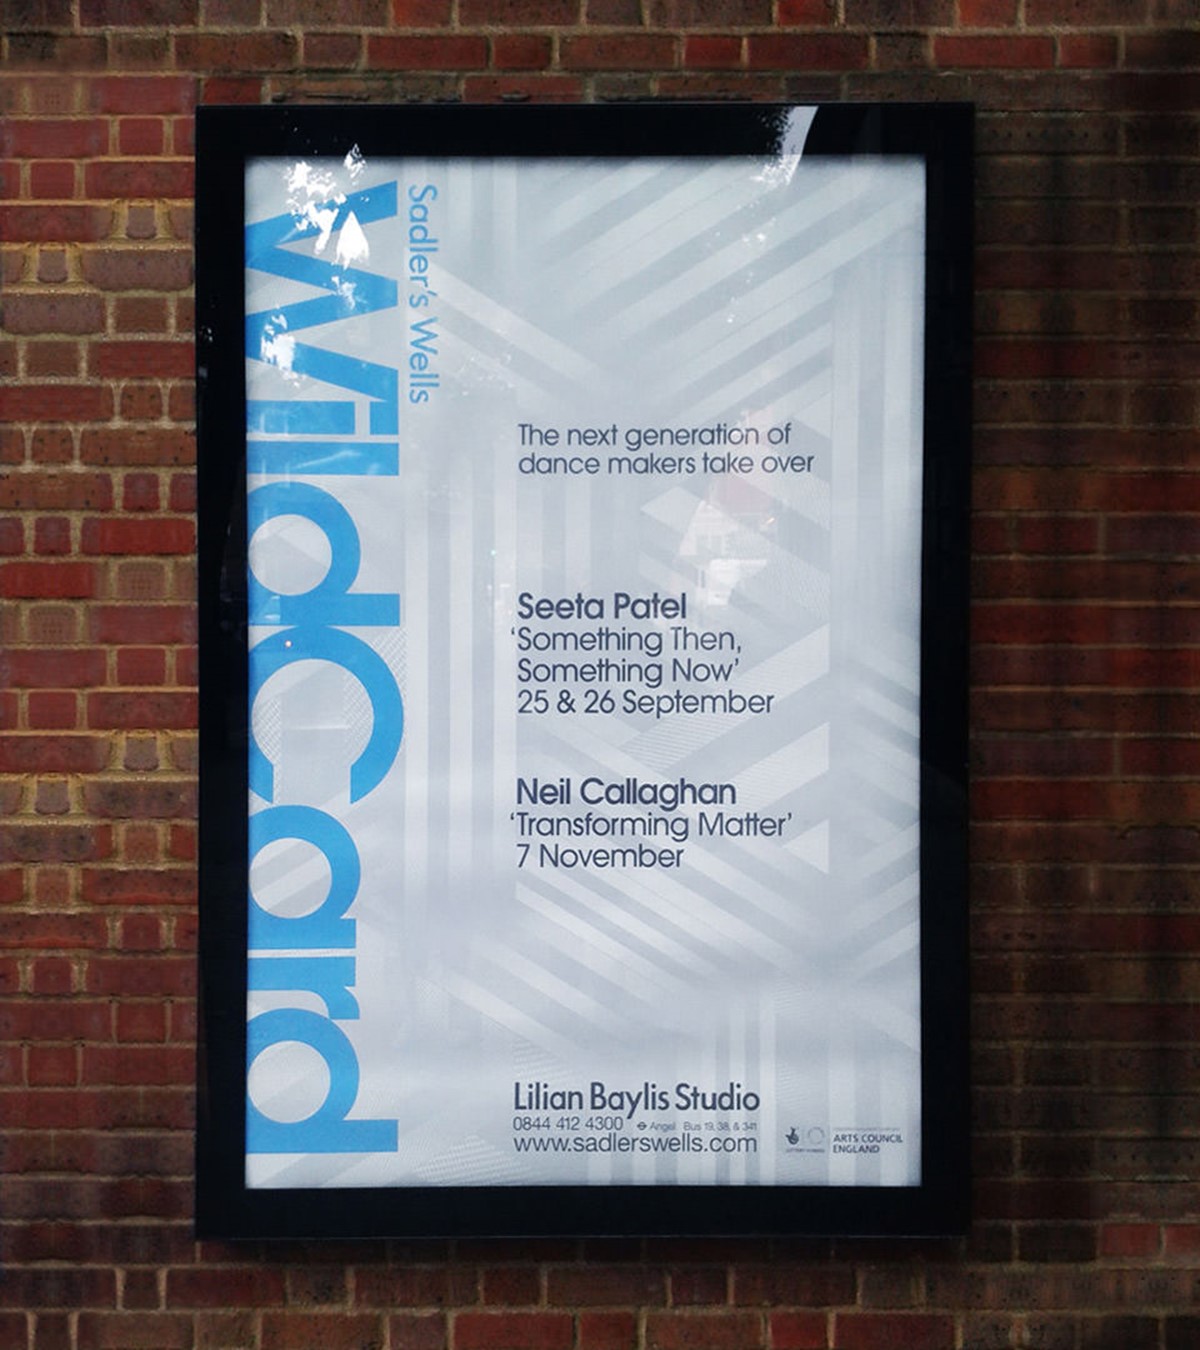 Sadler's Wells. Wildcard season 3. Outdoor poster. Identity and design by Superfried. Manchester.